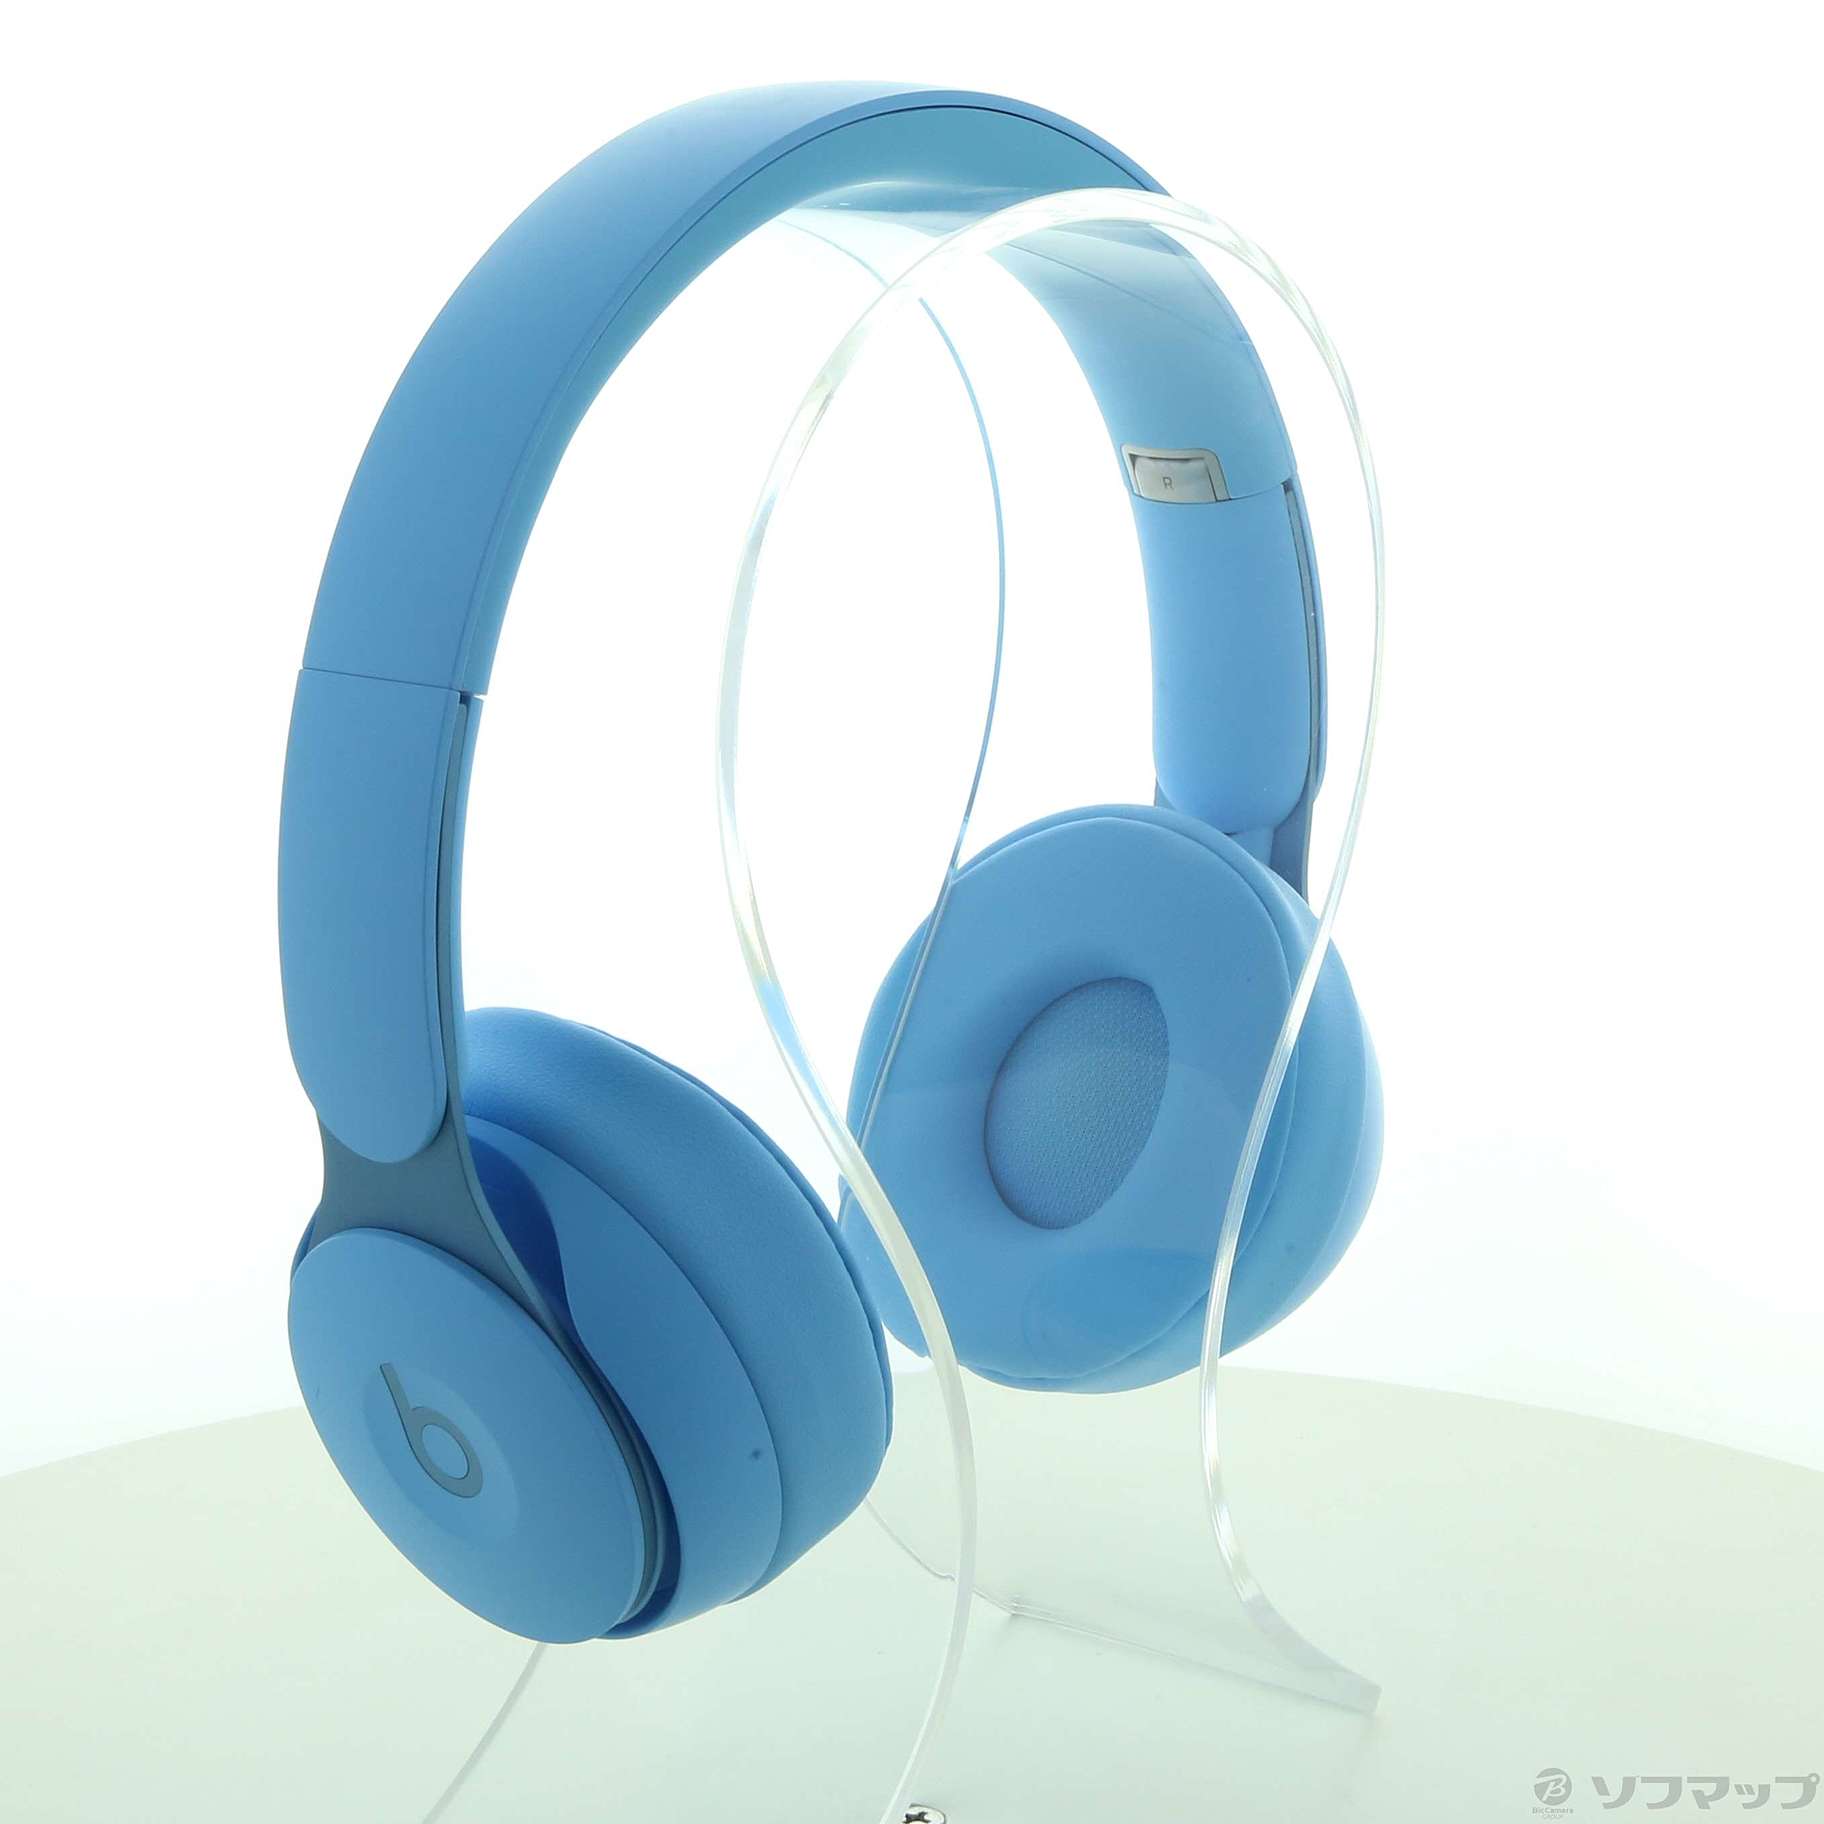 Beats Solo Pro More Matte Collection MRJ92FE／A ライトブルー ◇04/27(火)値下げ！